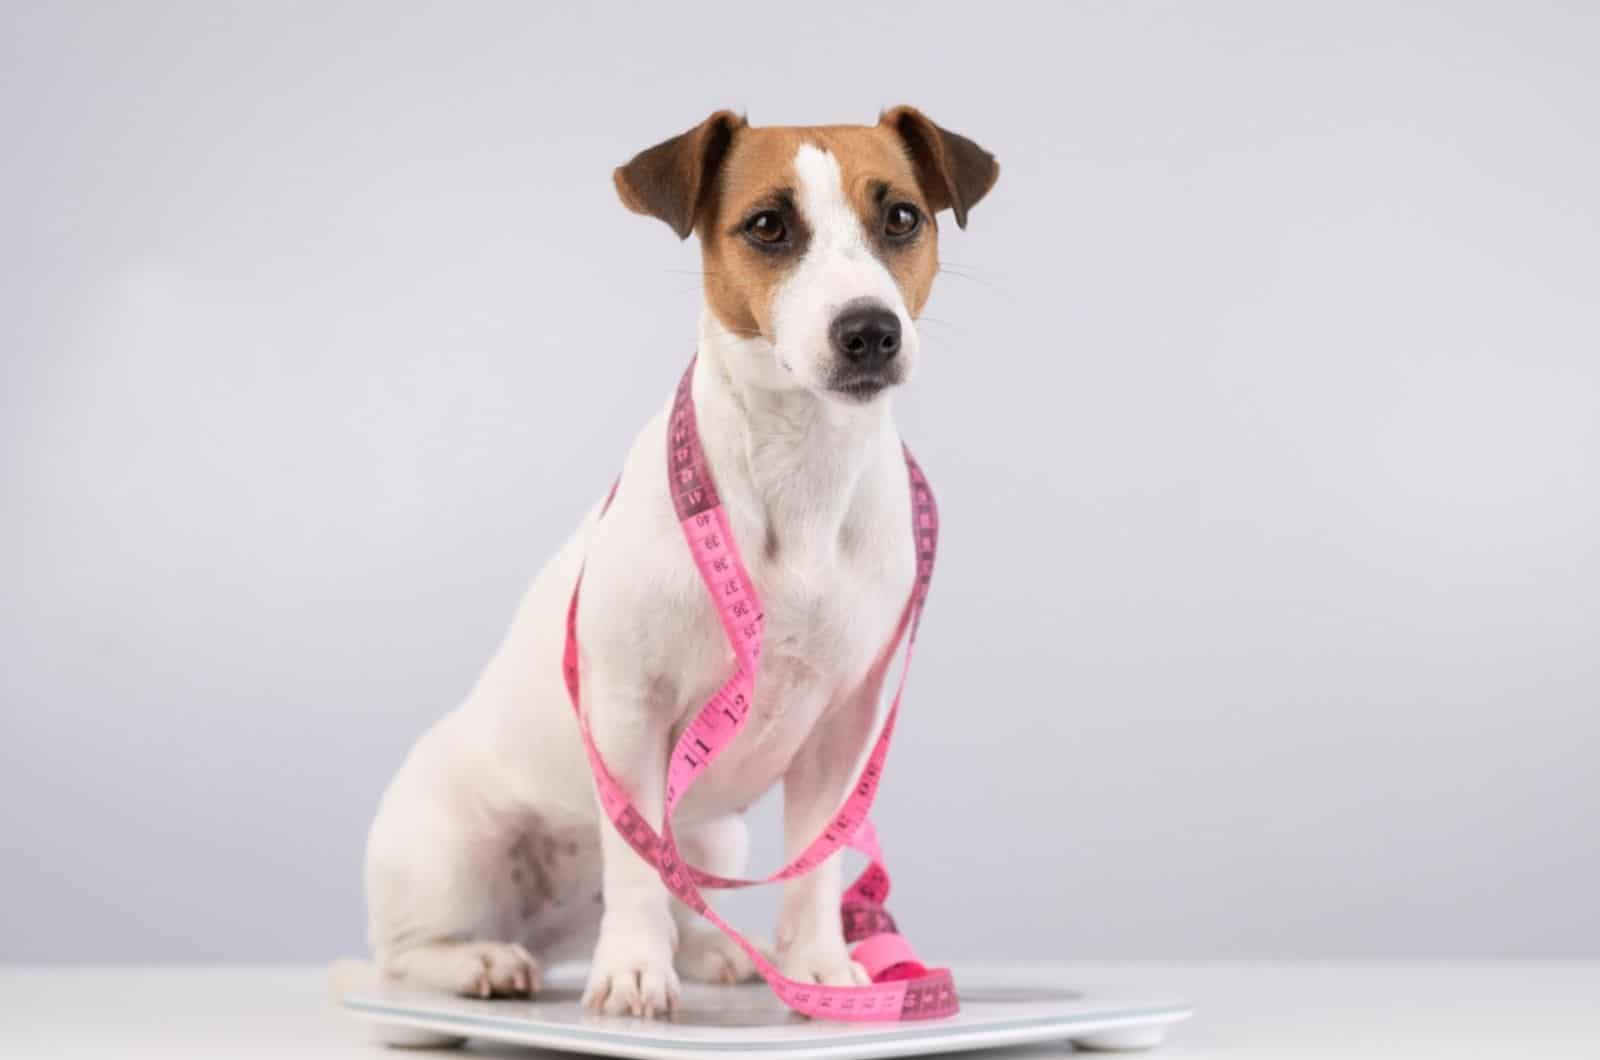 jack russell terrier stands on a scale with measuring tape